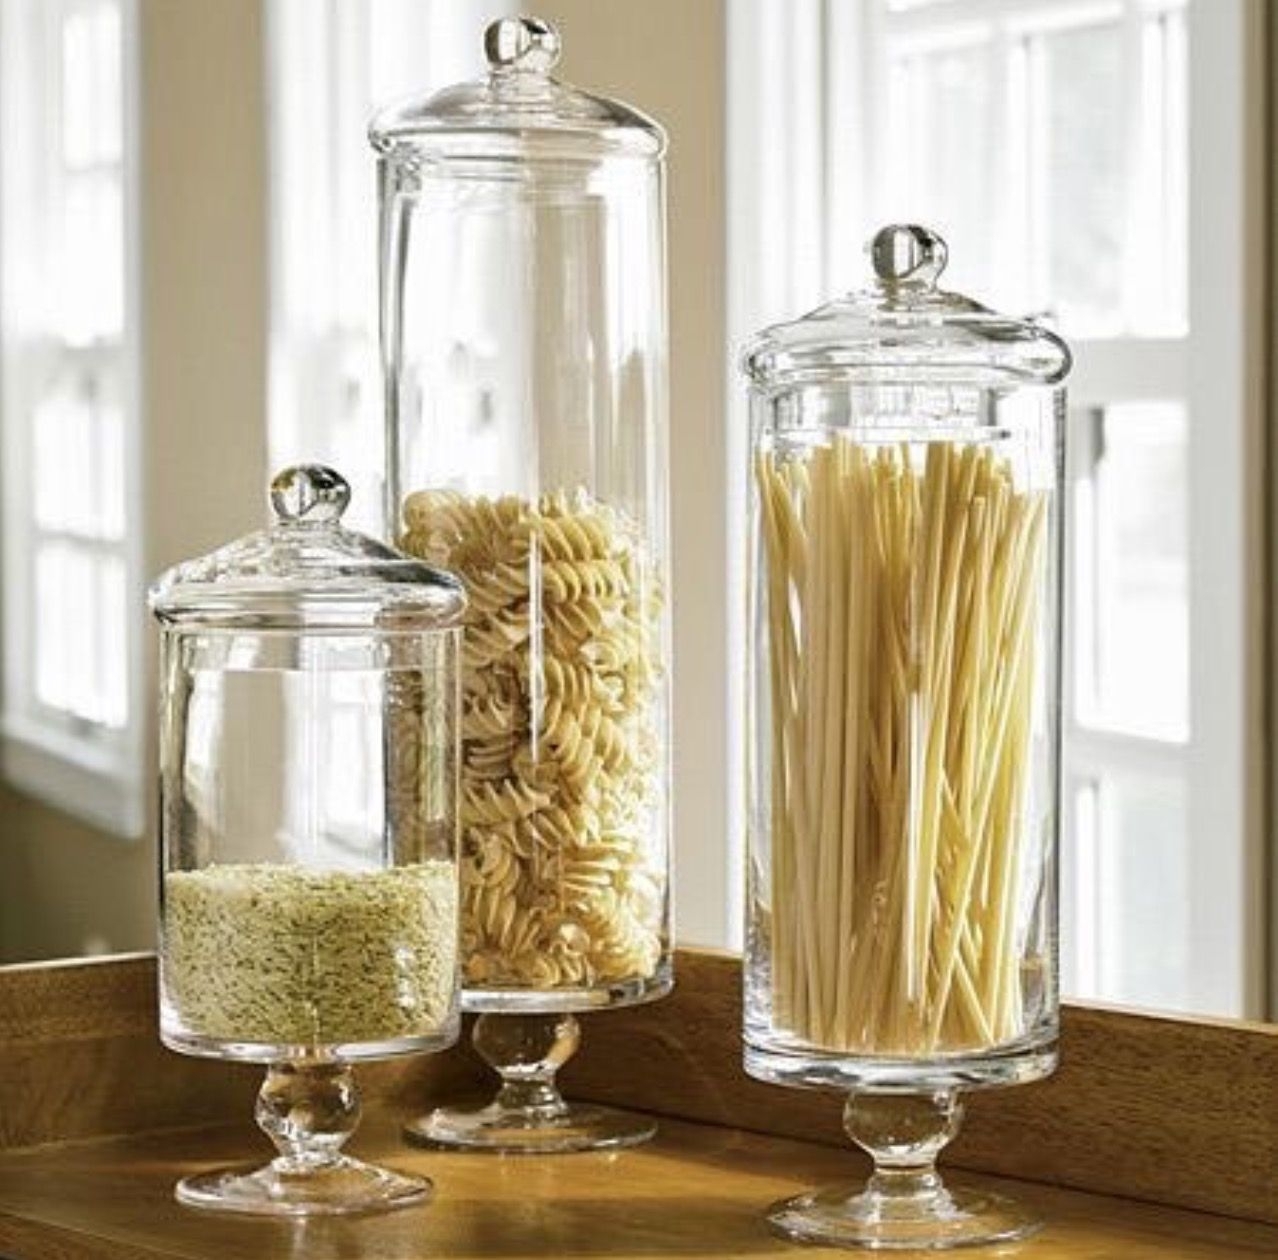 https://foter.com/photos/title/decorative-kitchen-canisters.jpg